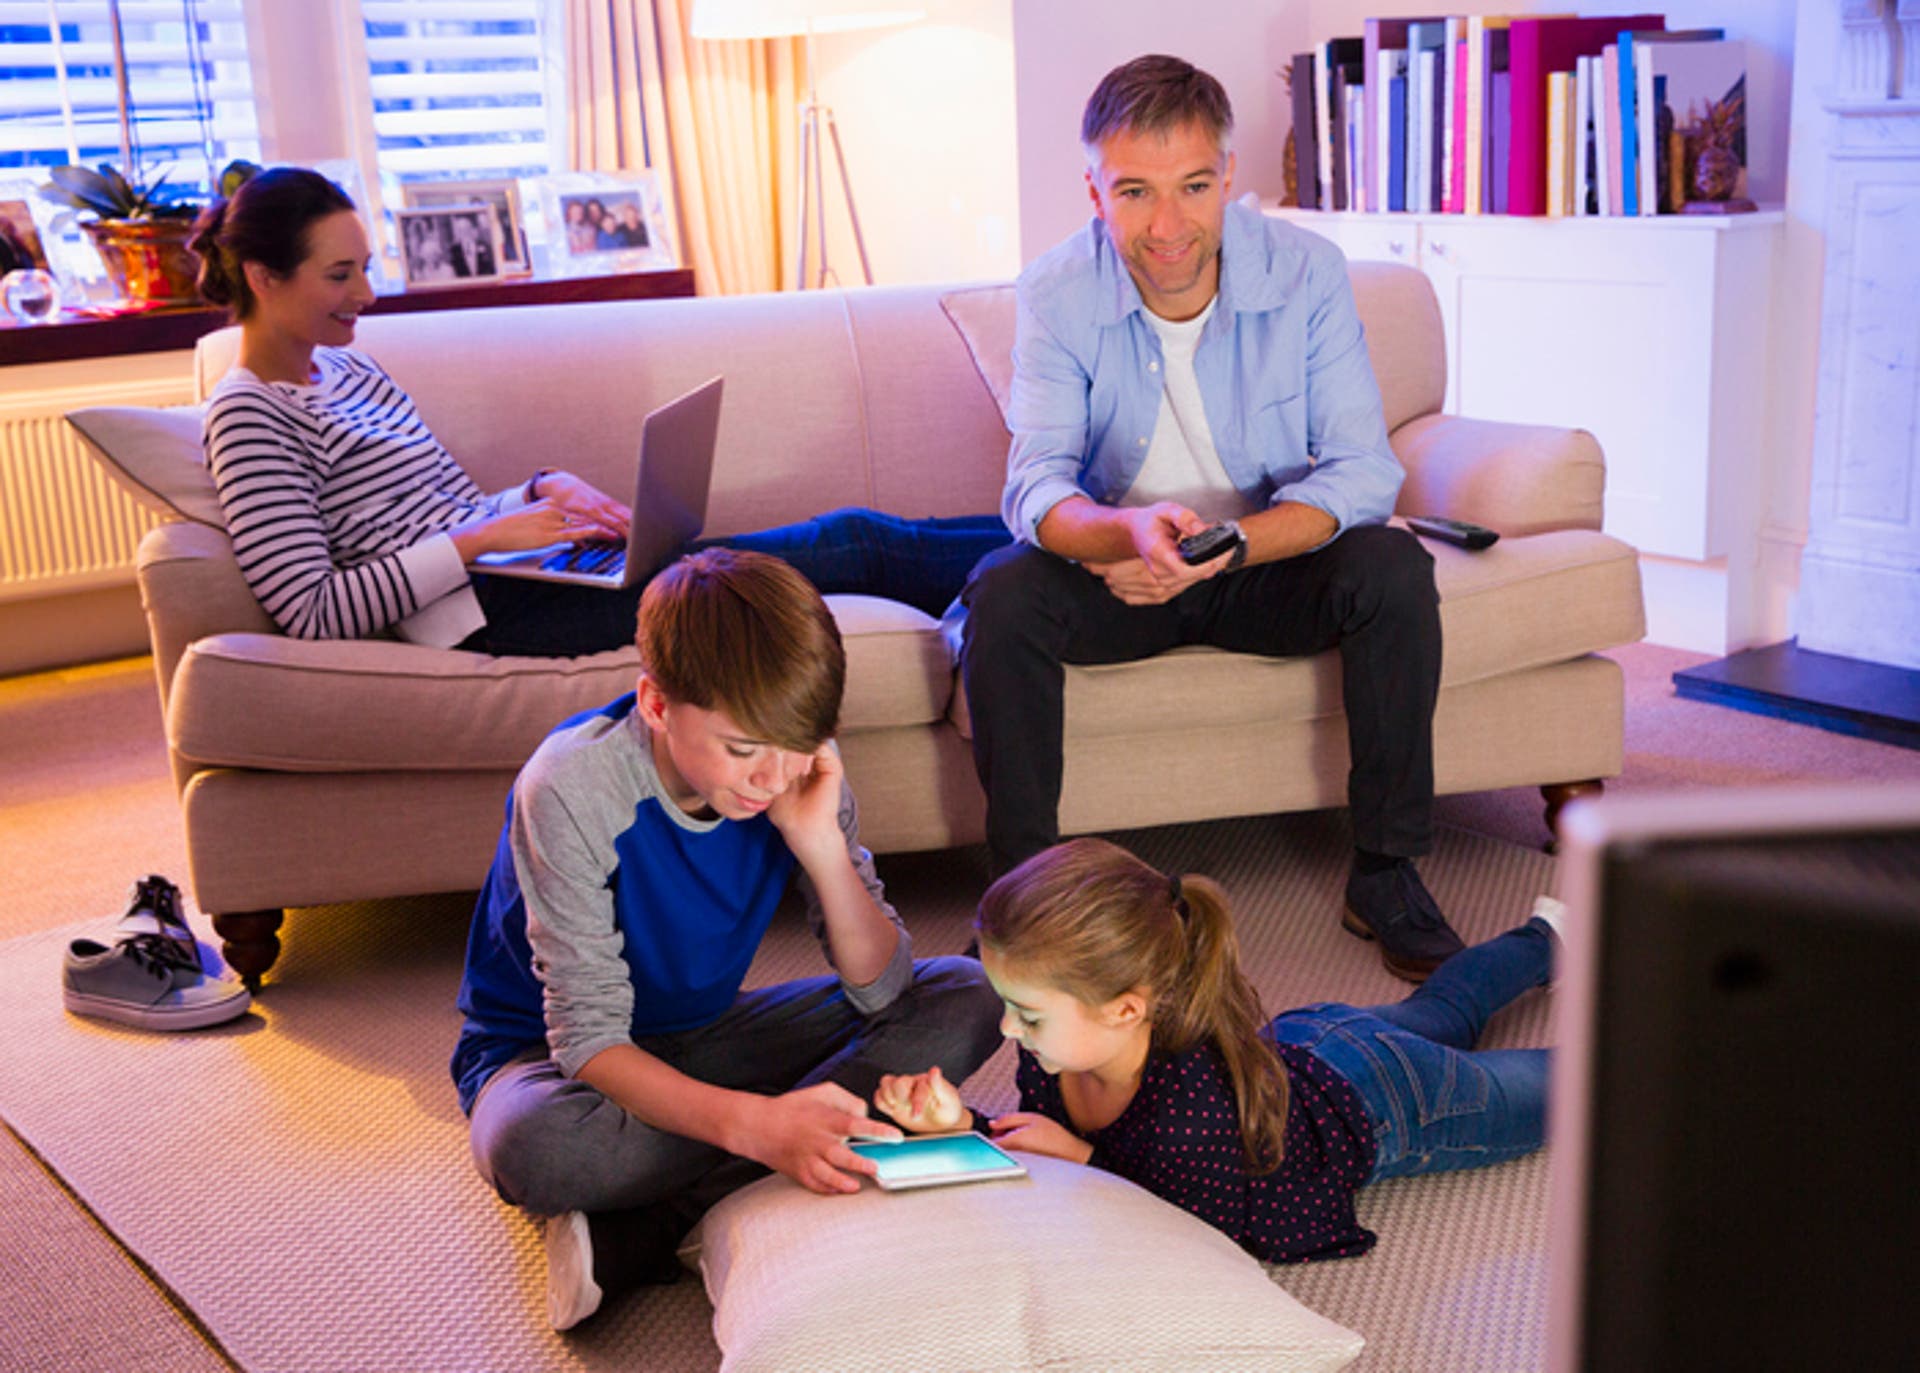  Family relaxing with technology in living room 